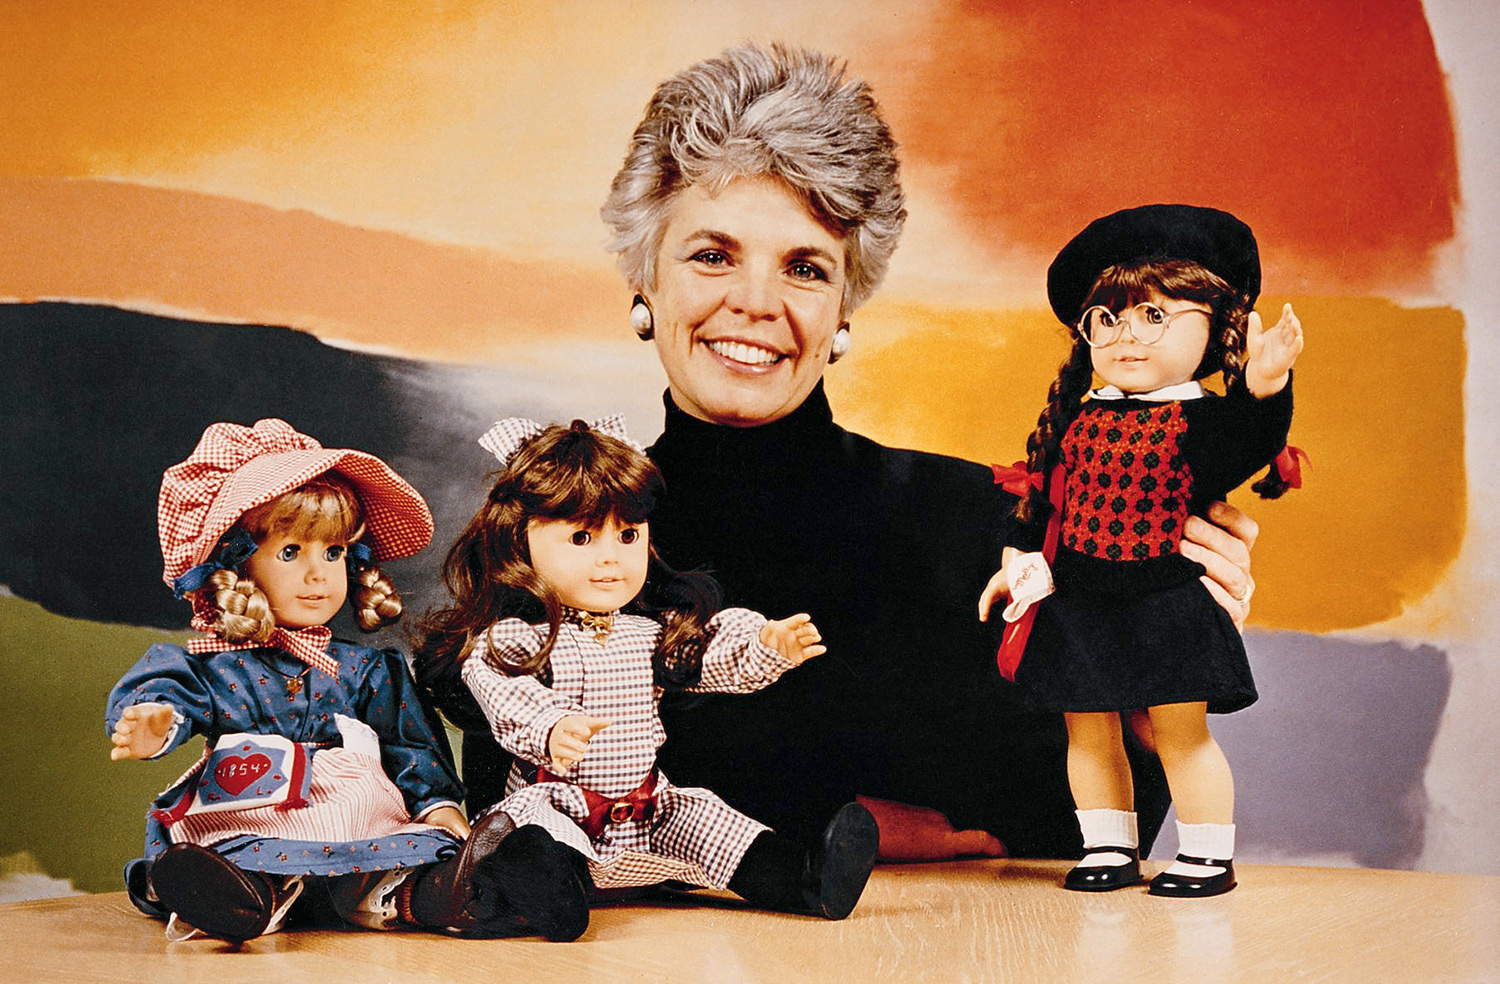 American Girl doll creator Pleasant T. Rowland smiles alongside the three first American Girl Dolls launched in 1986. The dolls wear historically accurate outfits. At left is Kirsten, in a pioneer bonne and apron, next to her is the Samantha doll in a plaid turn of the century dress, then Rowland herself smiling brightly at the camera with arms crossed and wearing a black turtleneck, and on the far right is Molly dressed in 1940s bobby socks, argyle sweater and skirt.